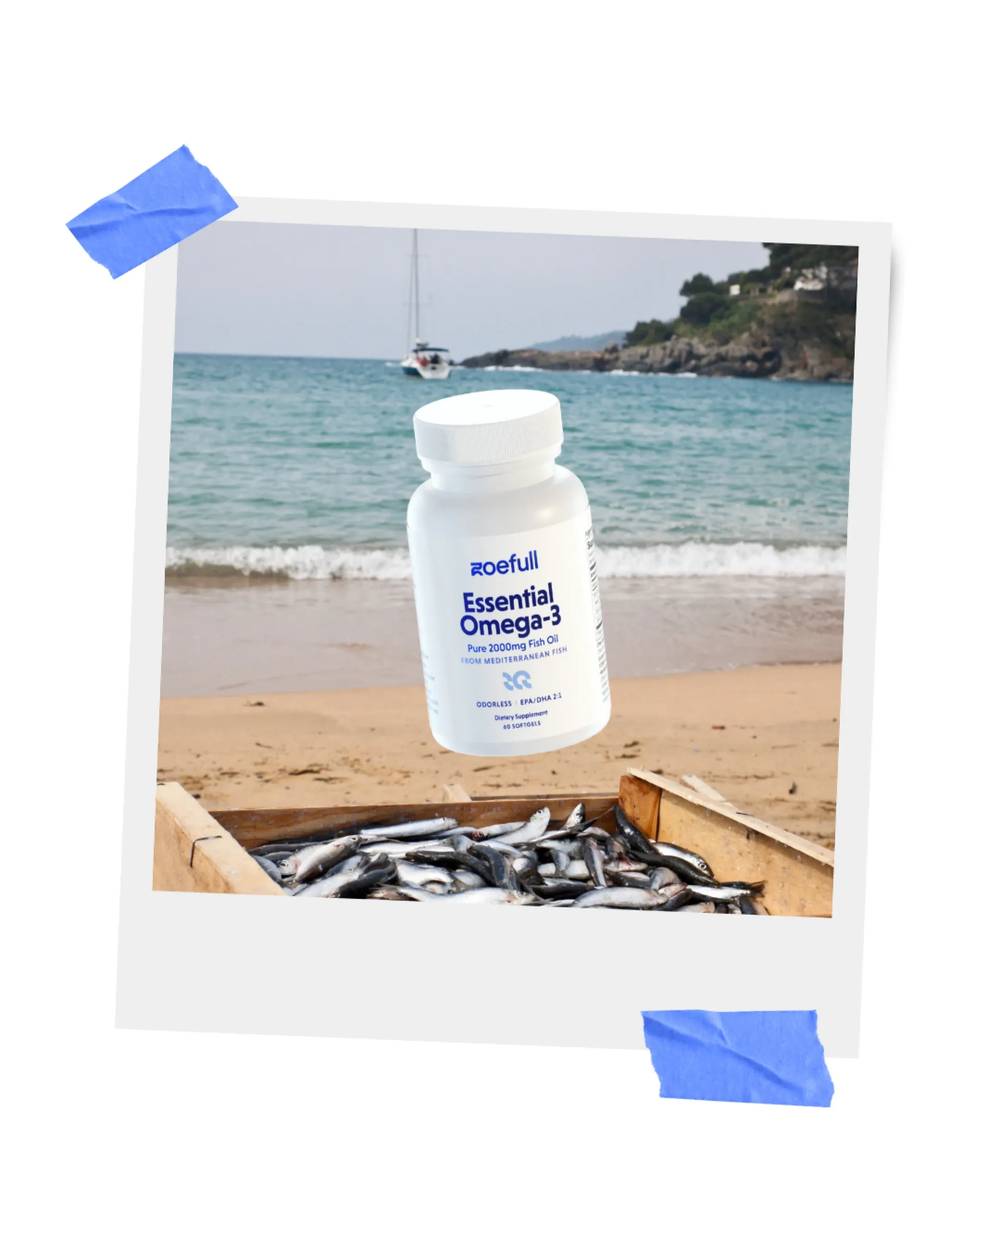 Design showcases zoefull's essential omega 3 product in front of the sea and a box of fresh fish.